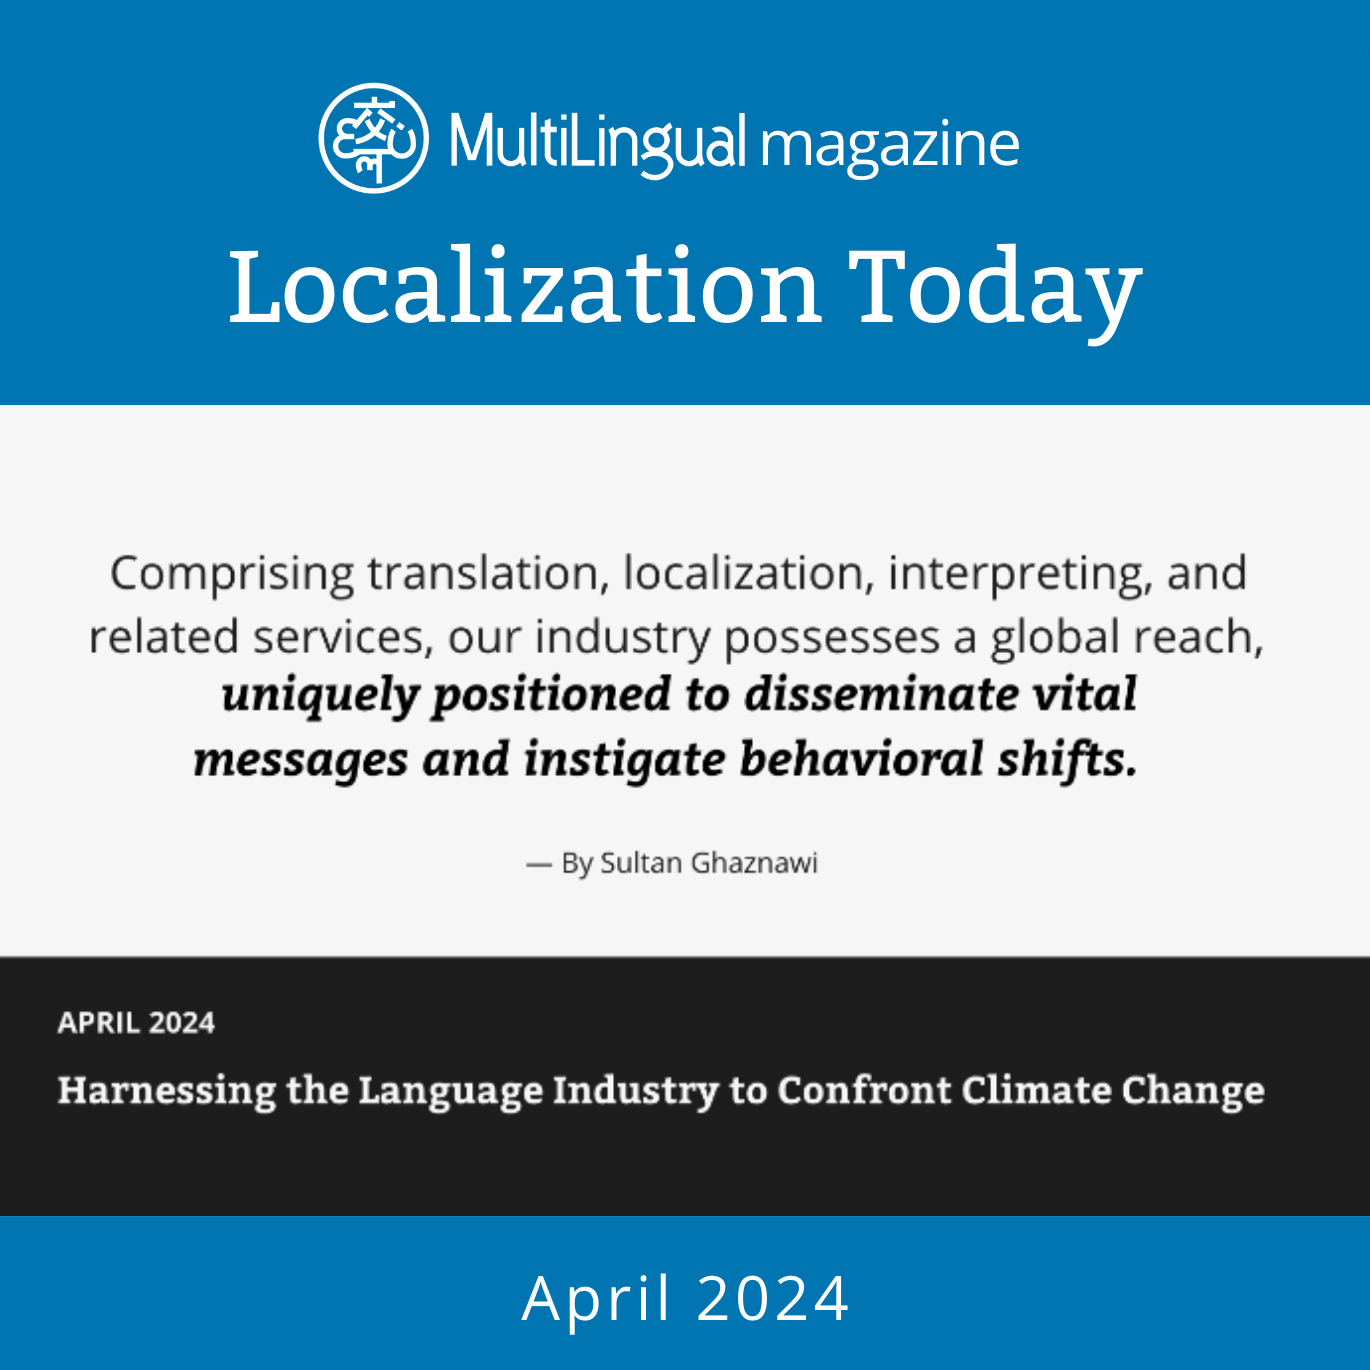 Harnessing the Language Industry to Confront Climate Change